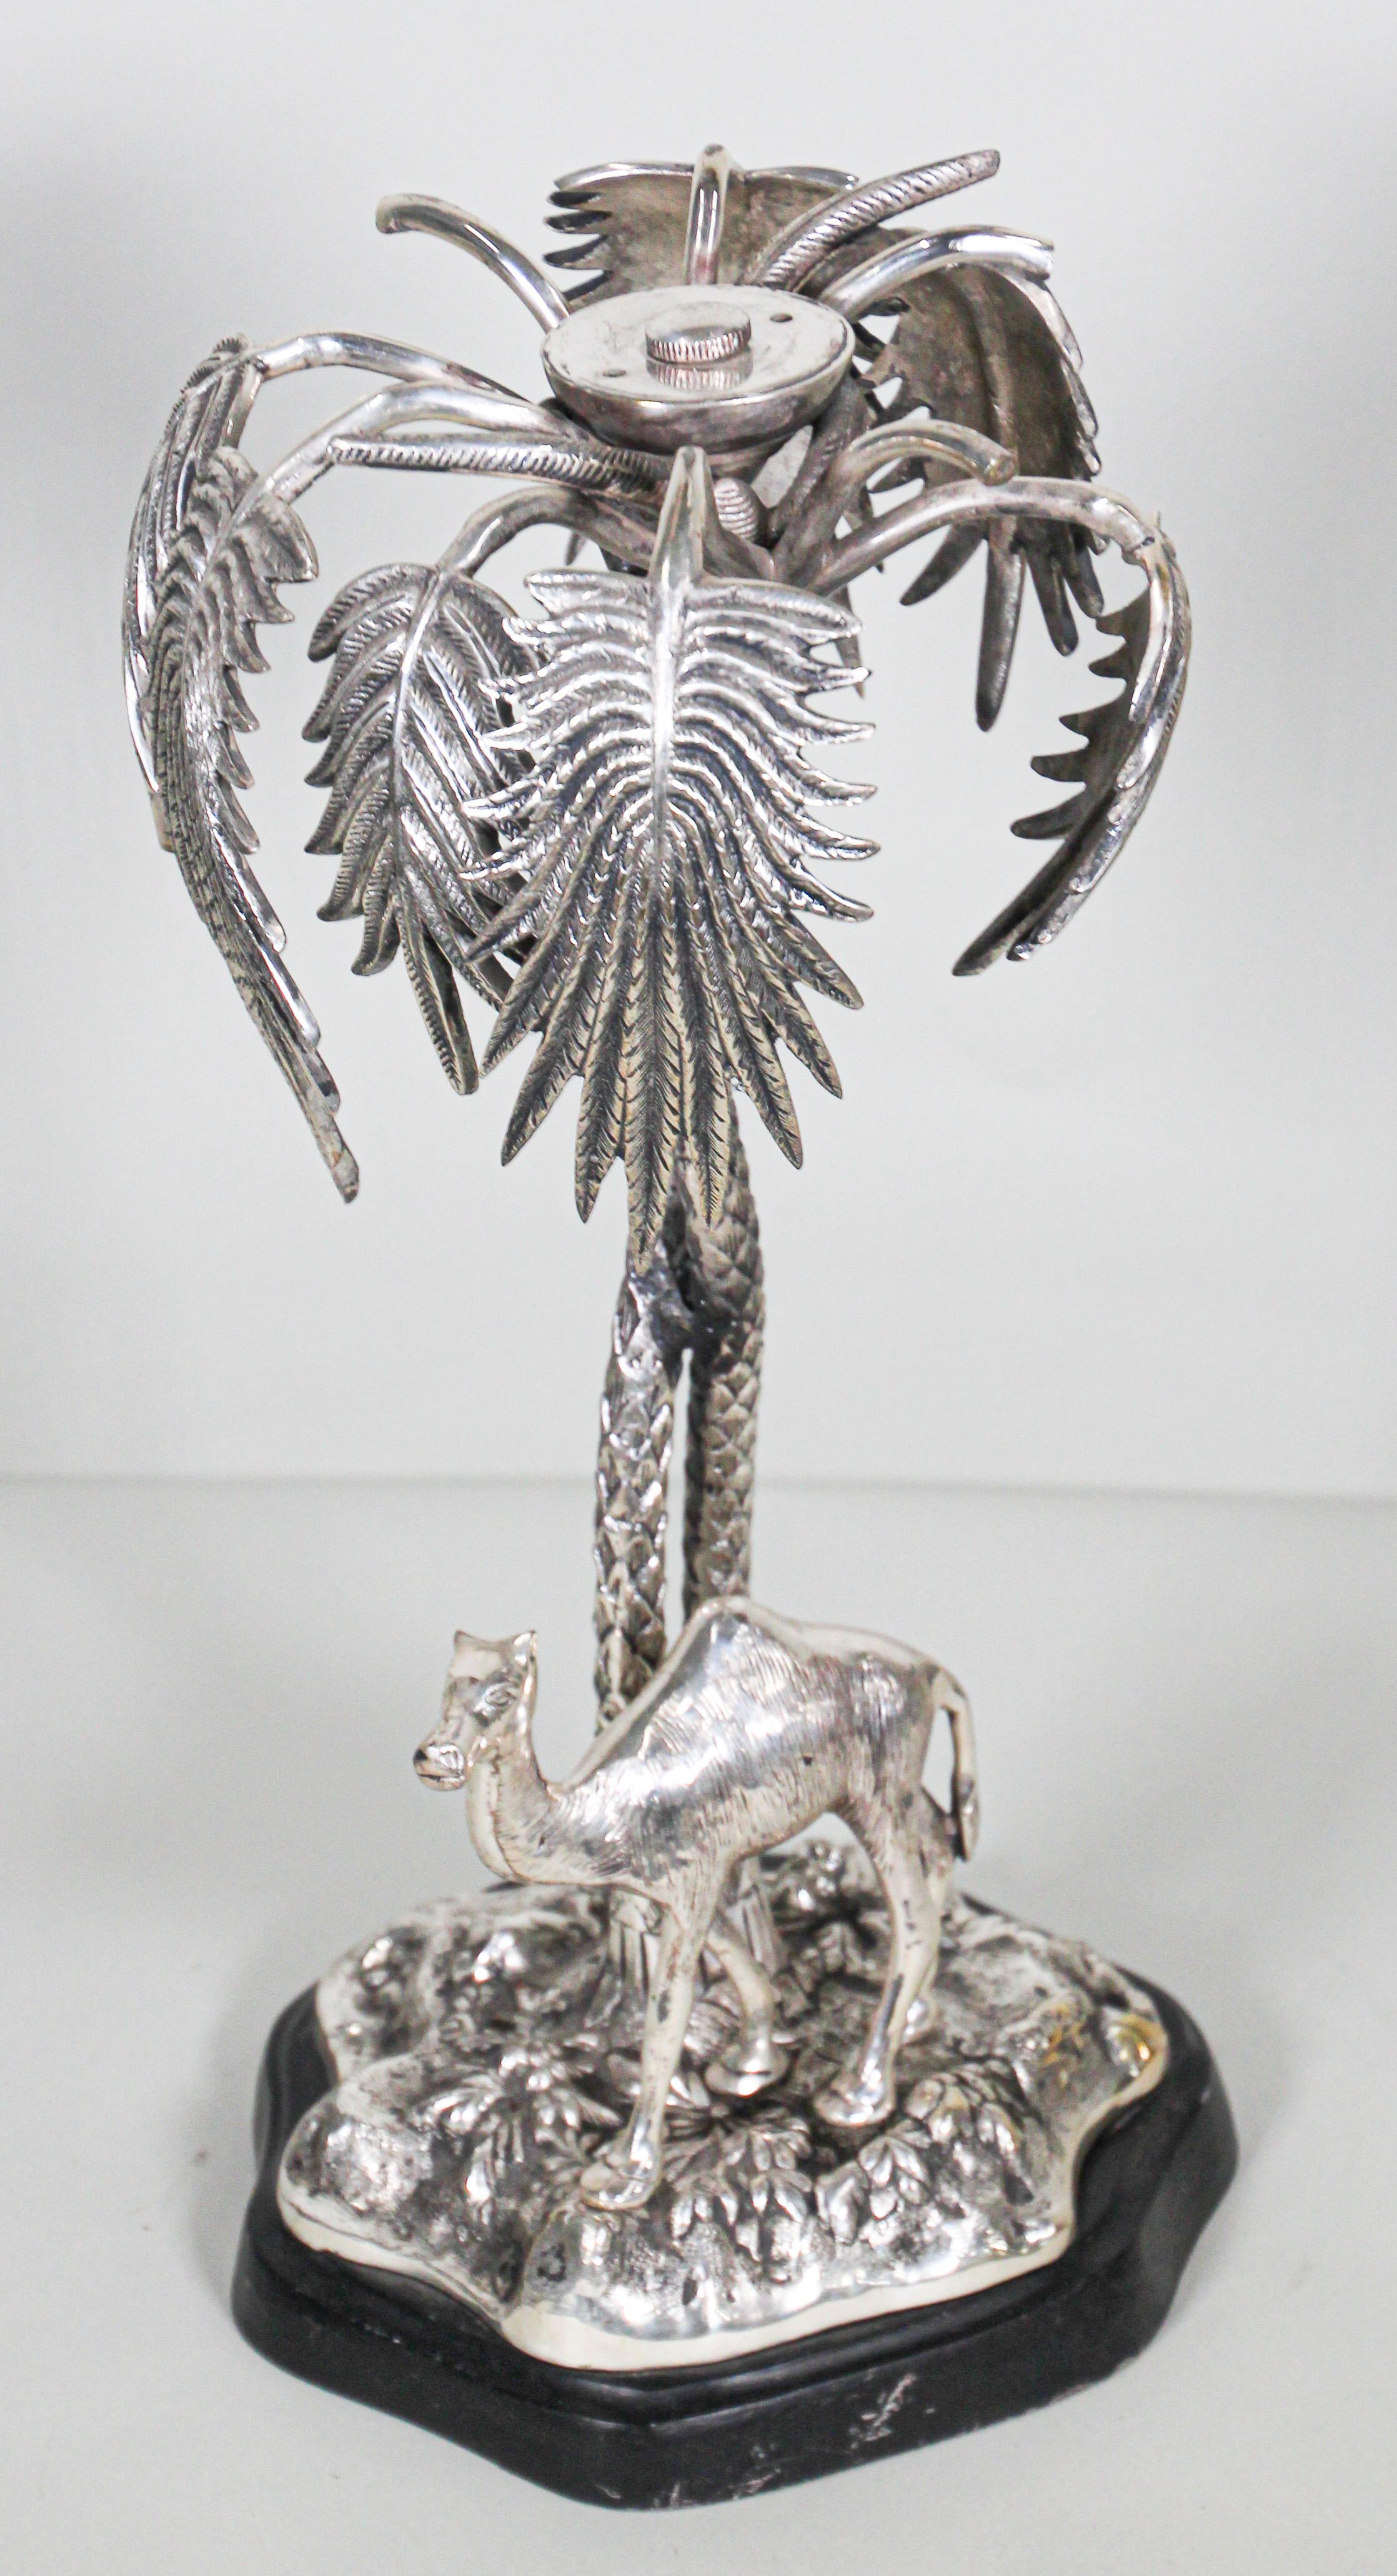 Large cast silver metal color sculpture of a desert scene in the form of two entwined palm trees and a camel standing on a rocky base under the palm trees.
A Victorian continental School 19th century style, Viennese Islamic Orientalist Art.
A black